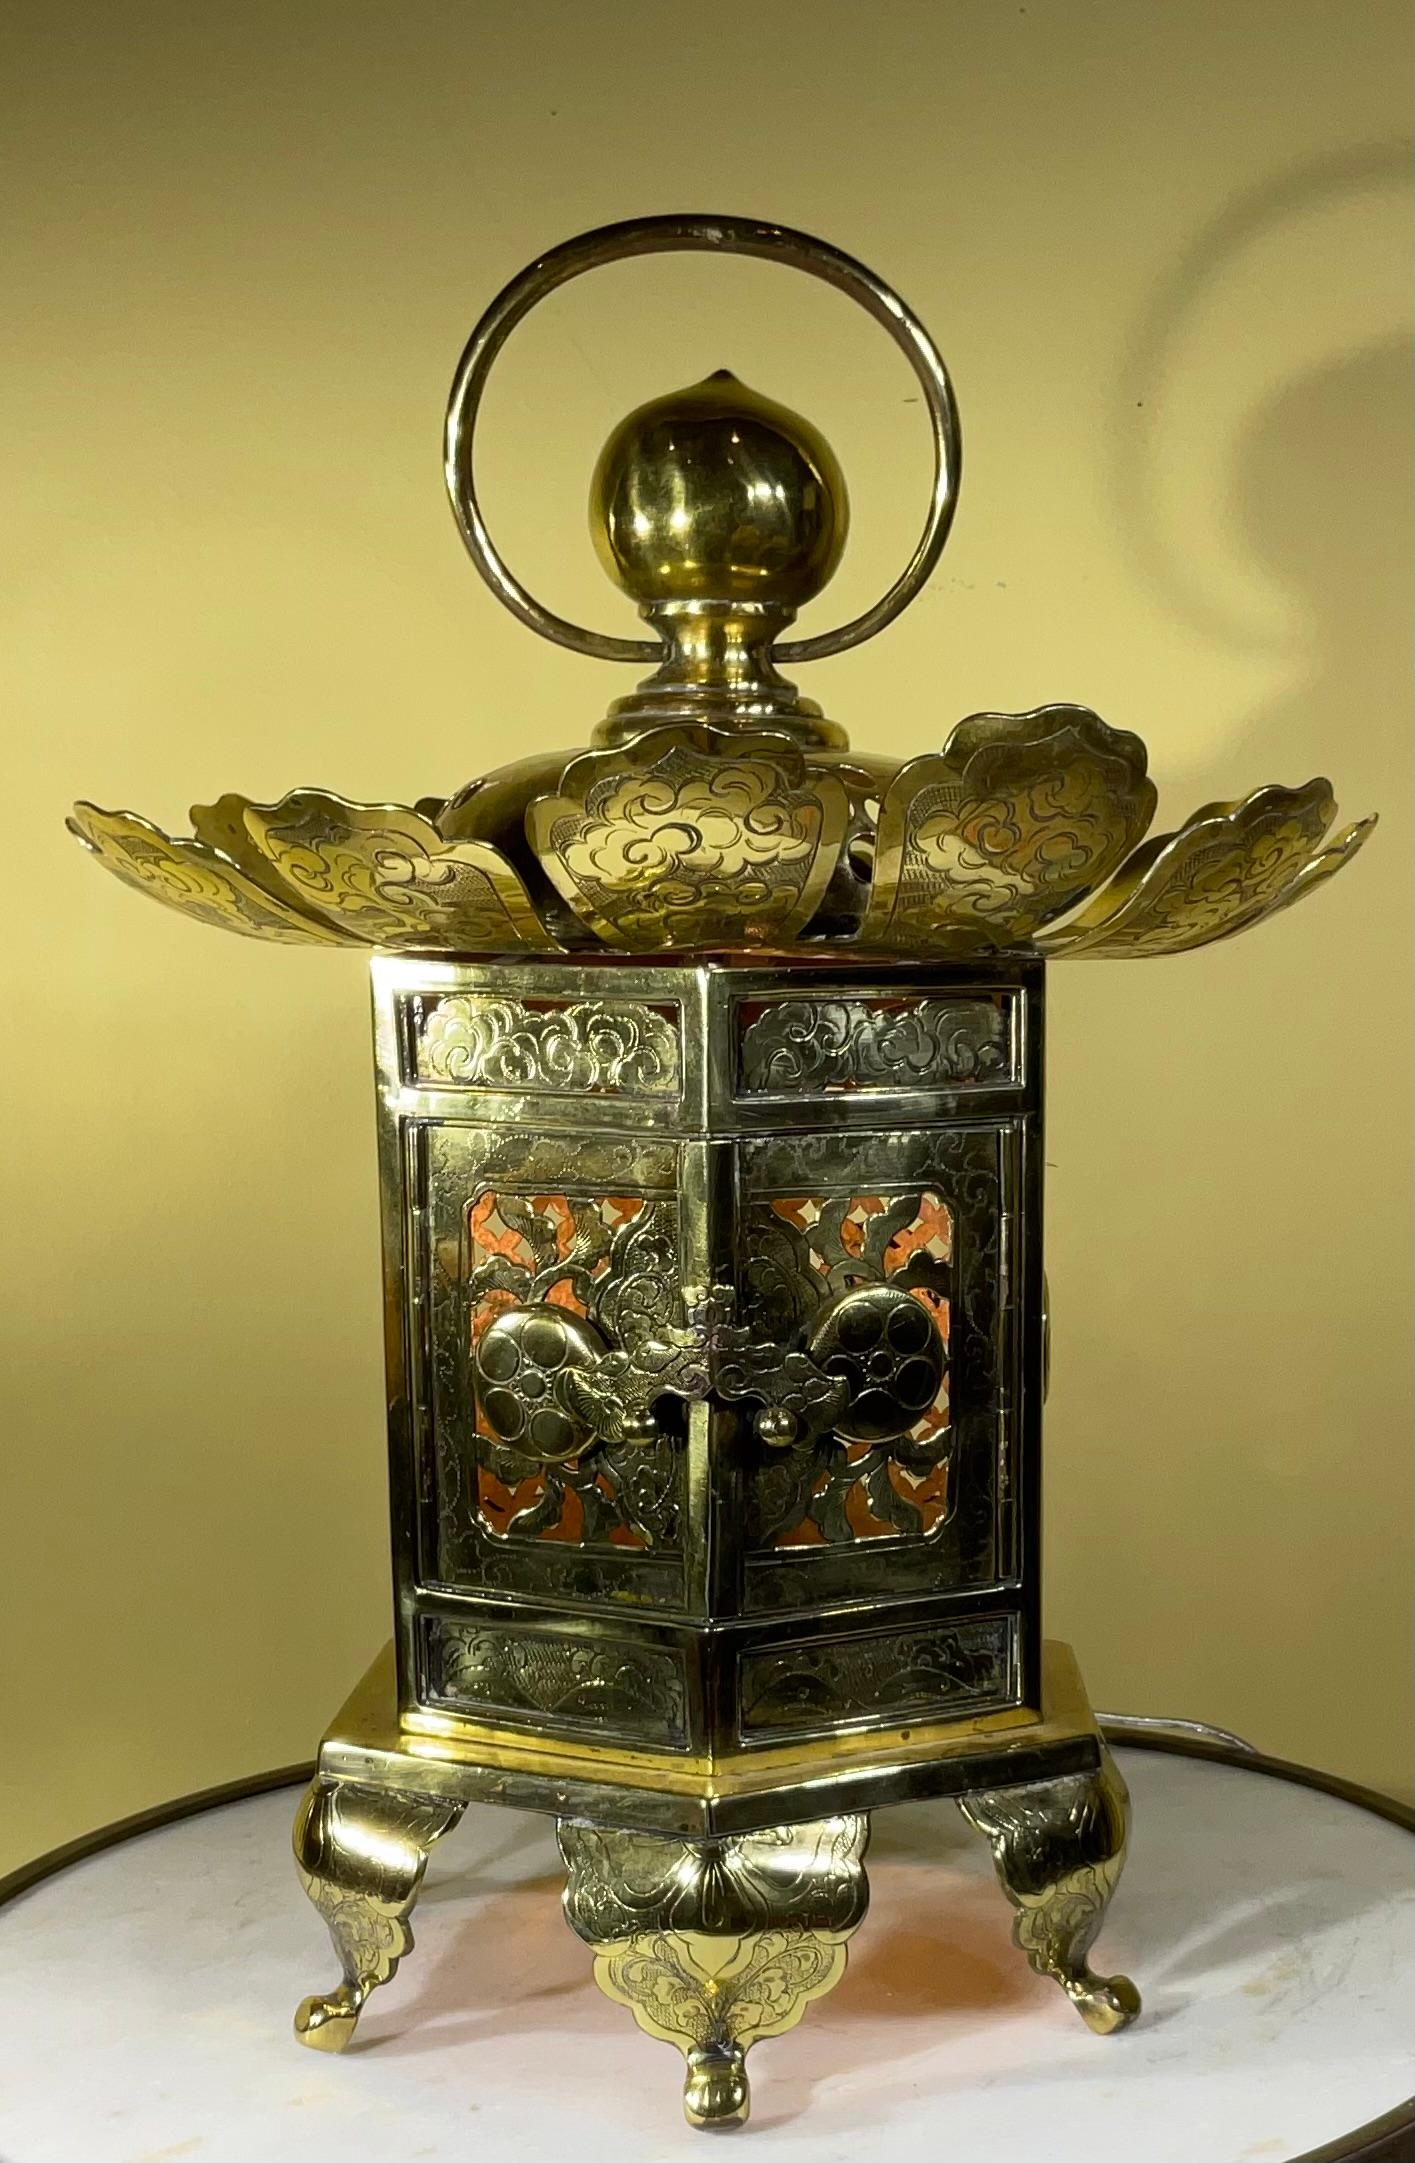 Vintage Japanese  Buddhist Alter Brass Lantern / Table Lamp / Center Piece  In Good Condition For Sale In Delray Beach, FL